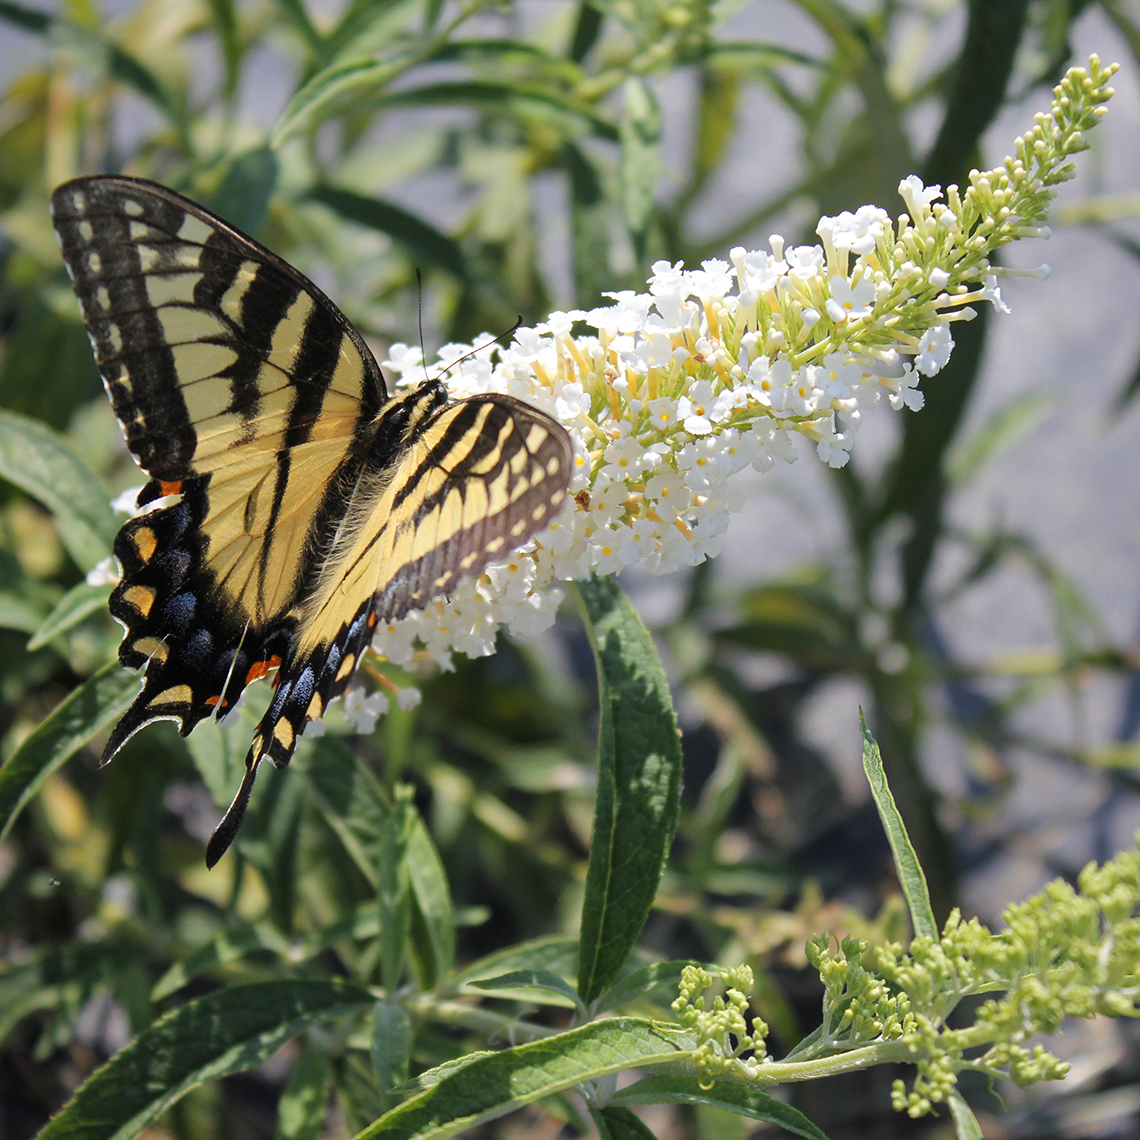 Close up of InSpired White Buddleia bloom with swallowtail butterfly